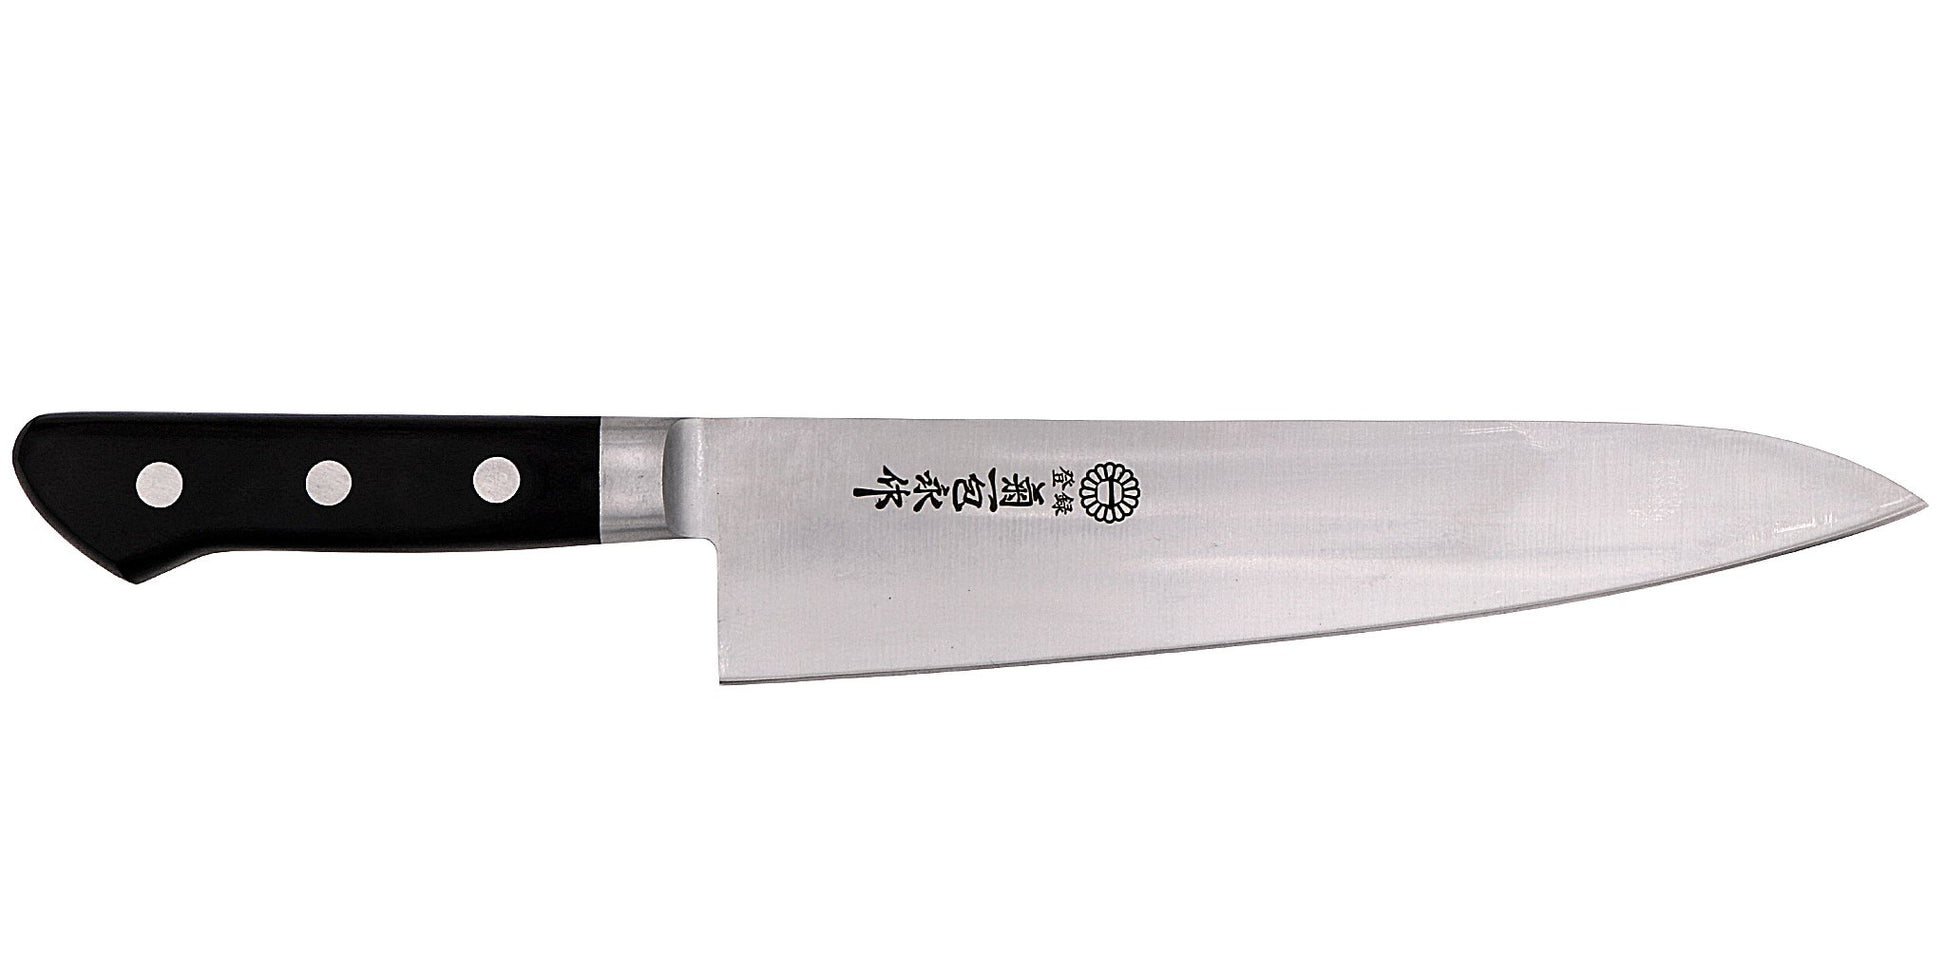 Cook's Illustrated this month has The Best Chef's Knives for $75